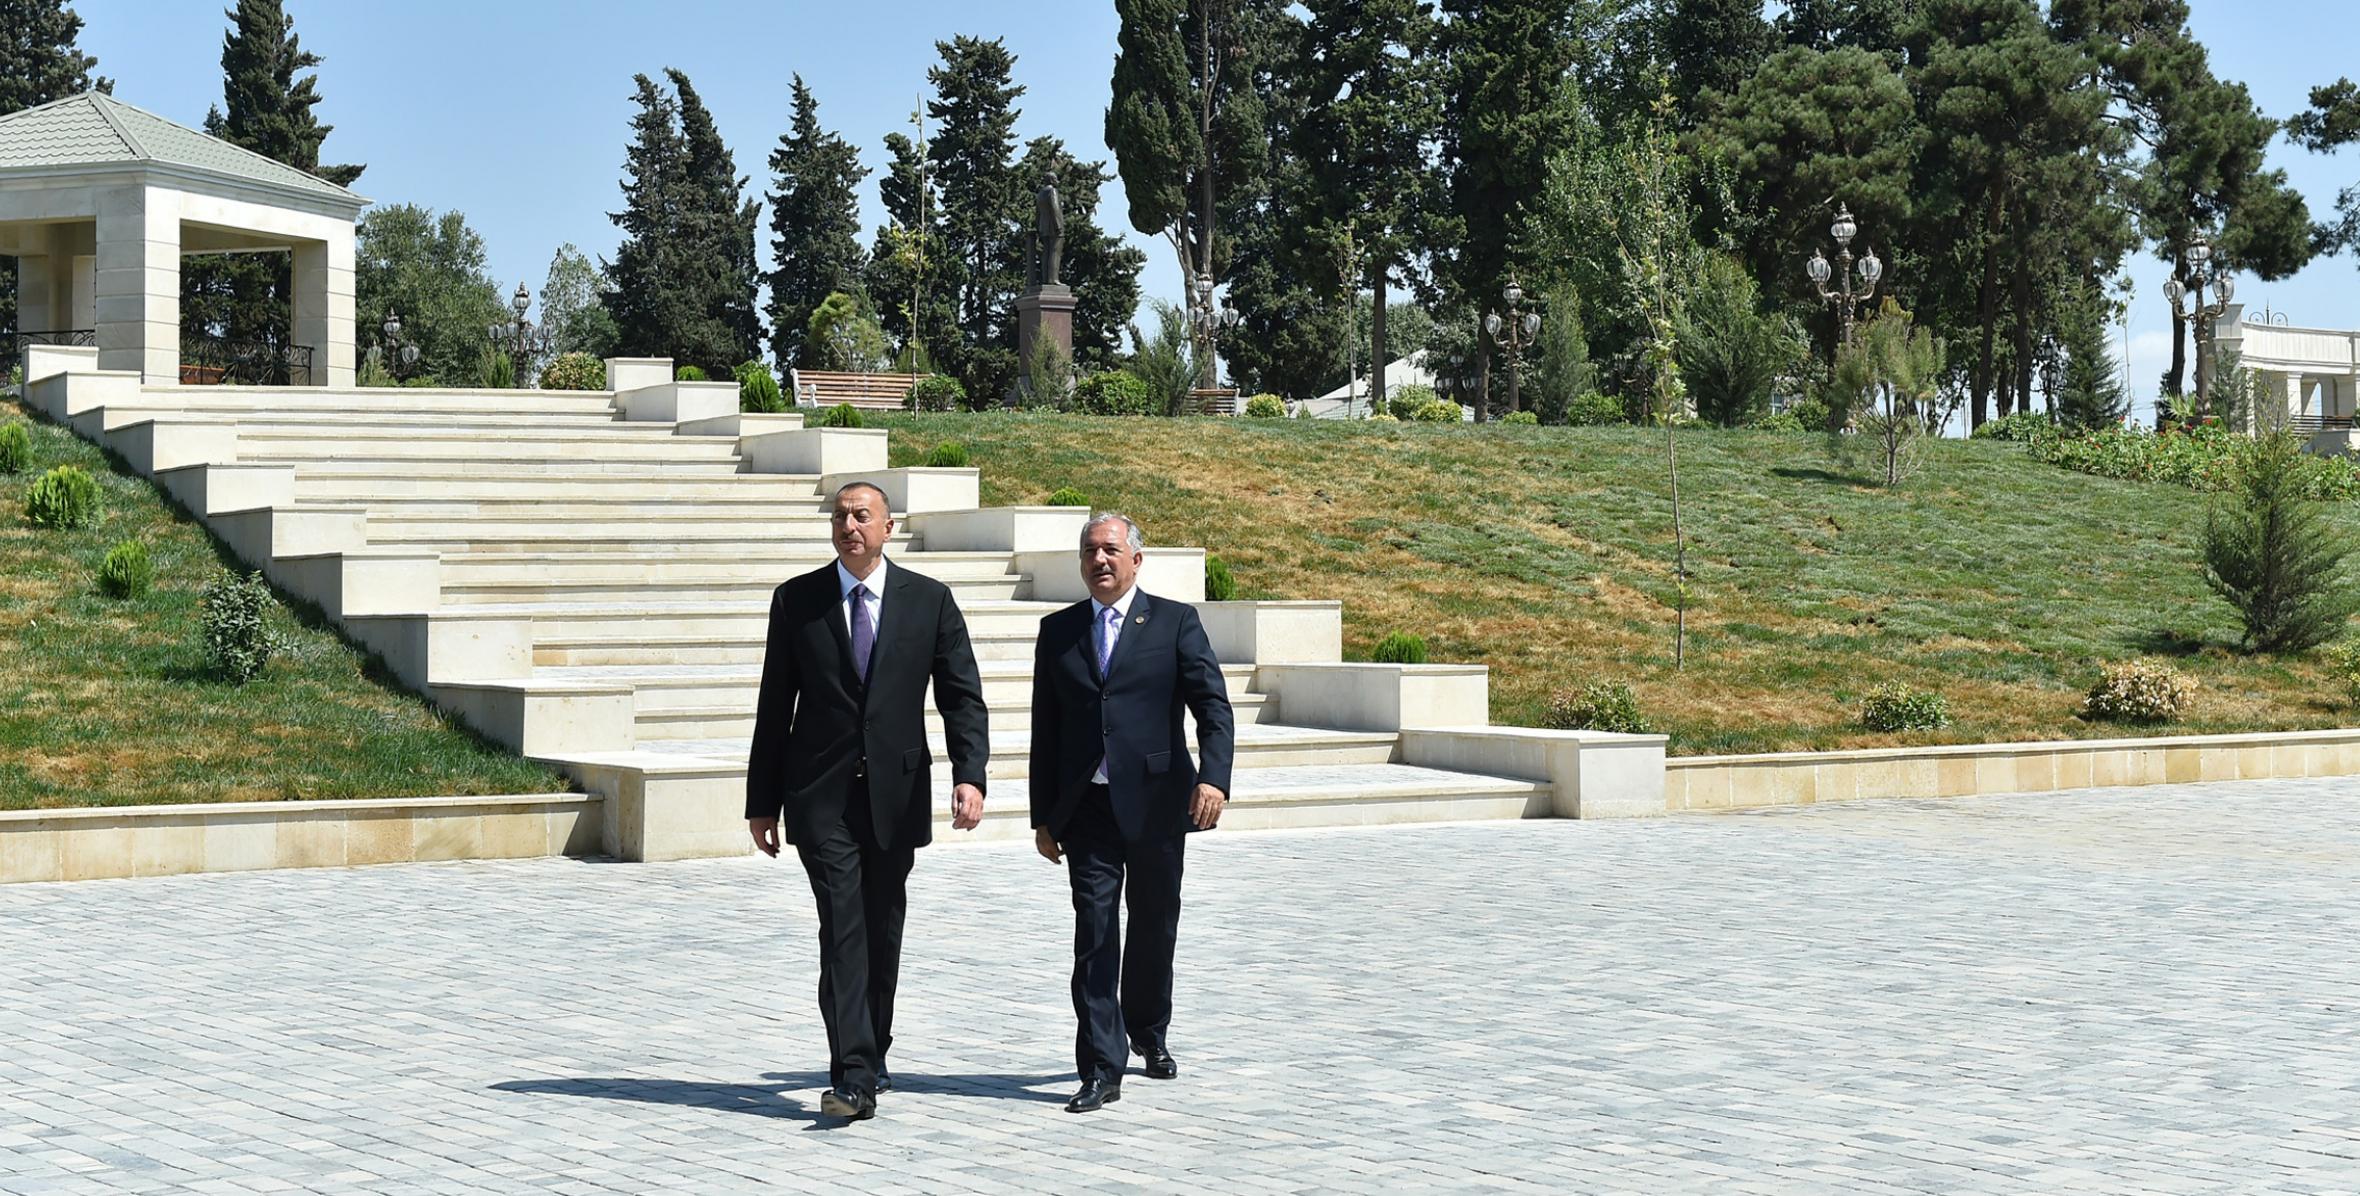 Ilham Aliyev attended the opening of a park-boulevard after Heydar Aliyev in Jalilabad